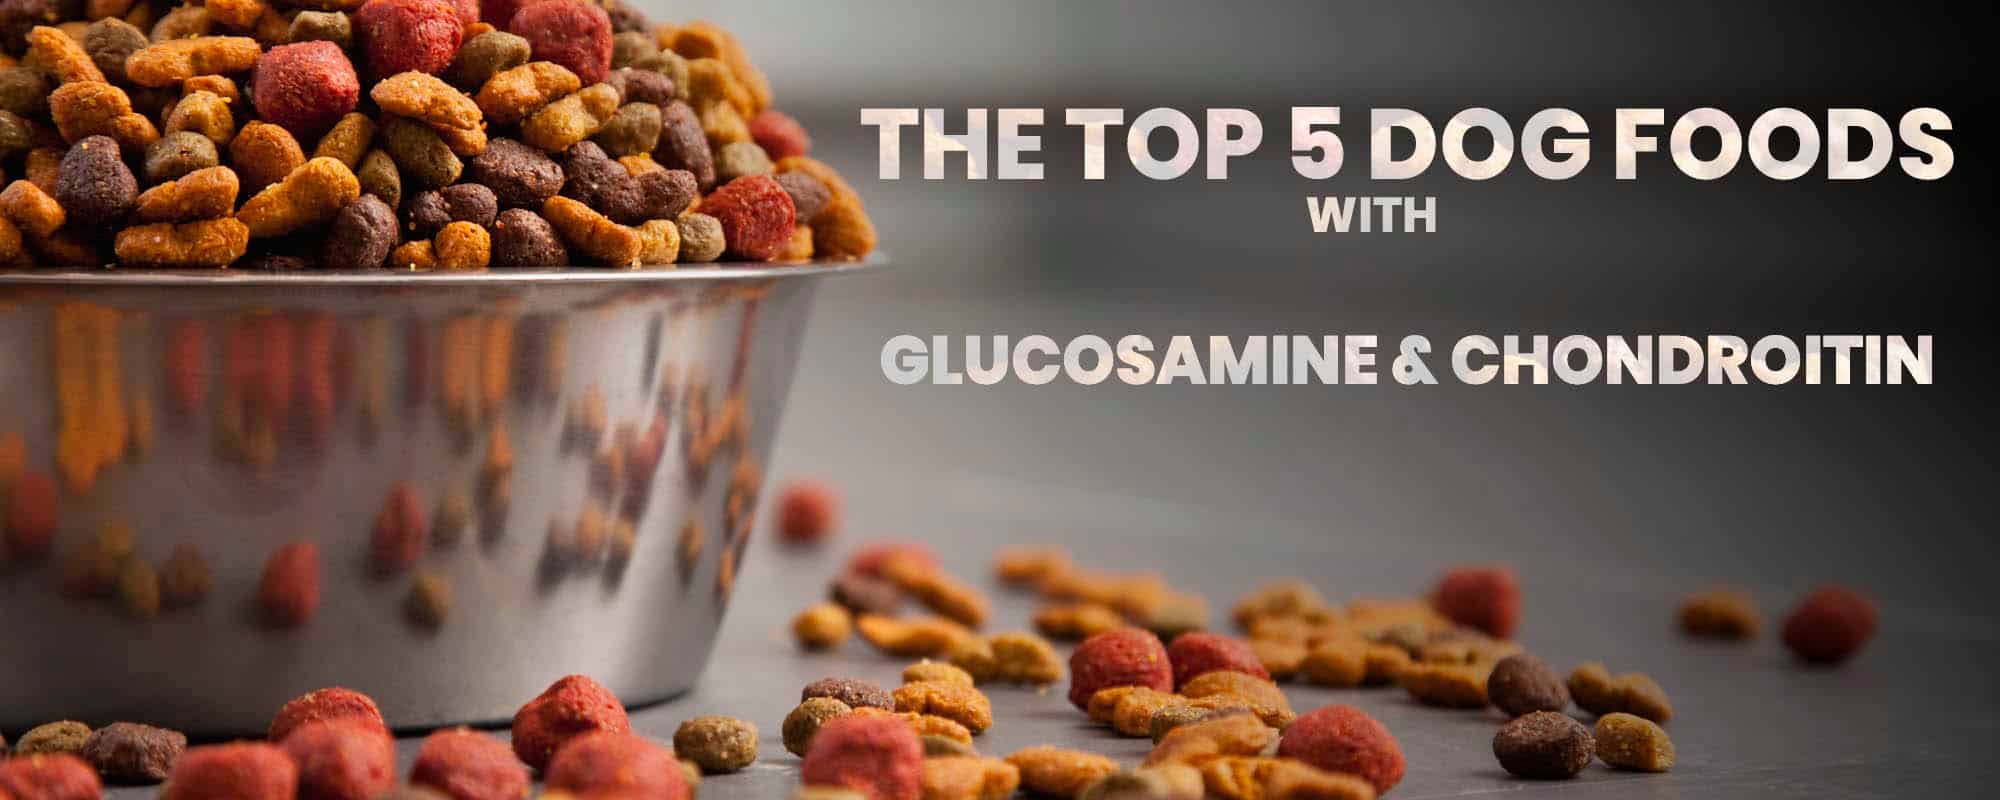 Dog Food with Glucosamine and Chondroitin